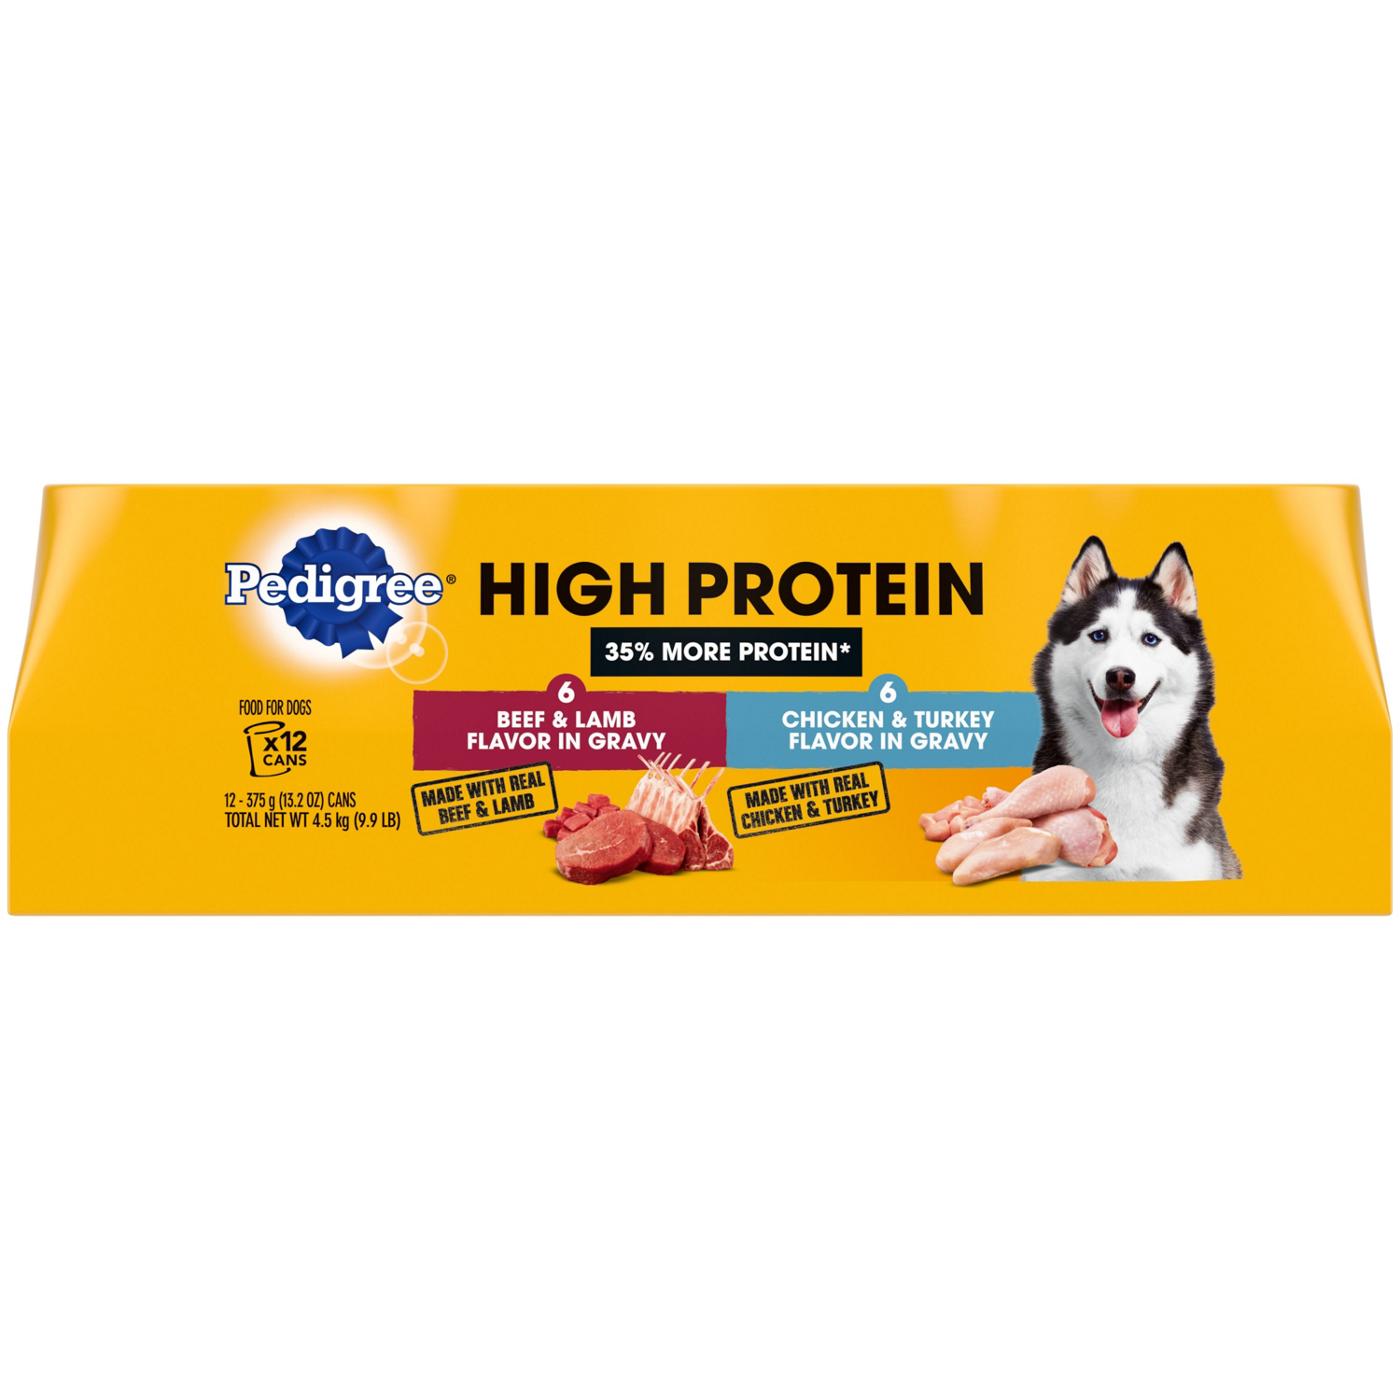 Pedigree High Protein Variety Pack; image 1 of 5